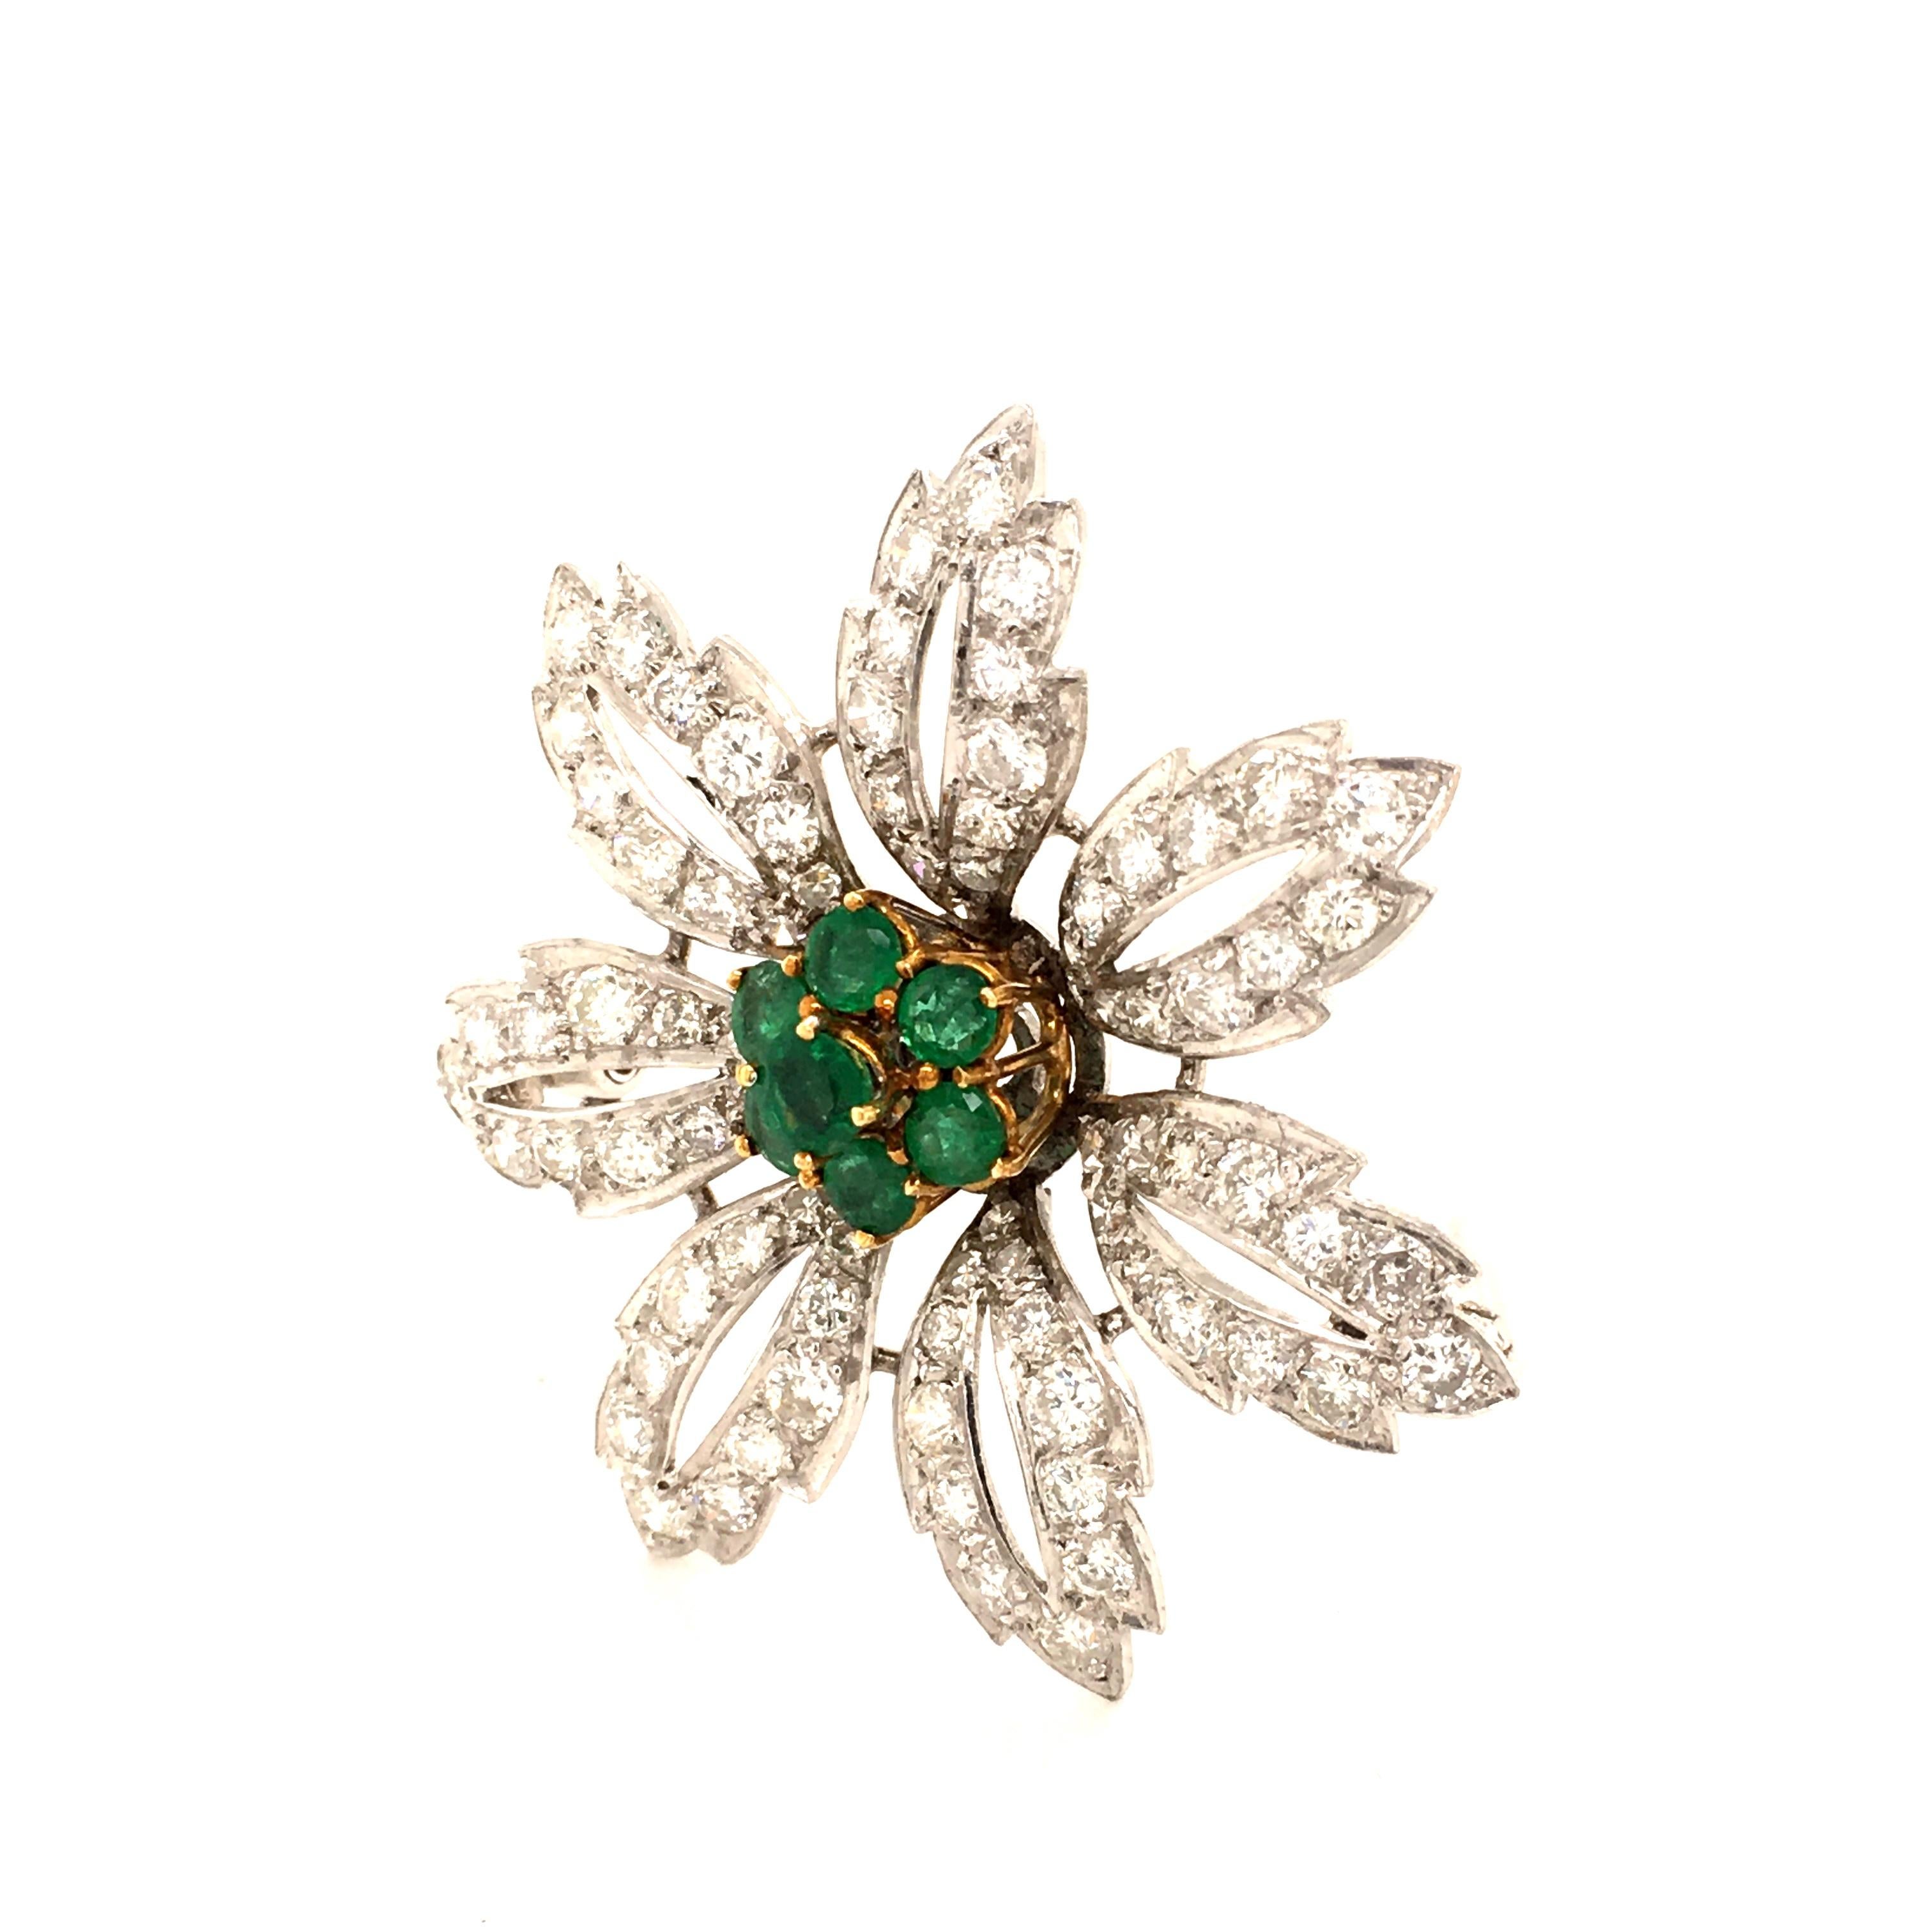 The centre of this charming flower brooch in 14 karat white and yellow gold is set with 7 round-cut emeralds, total weight approximately 1.10 carats. The seven slightly curved leaves are set with 84 brilliant-cut diamonds of H/I-colour and si